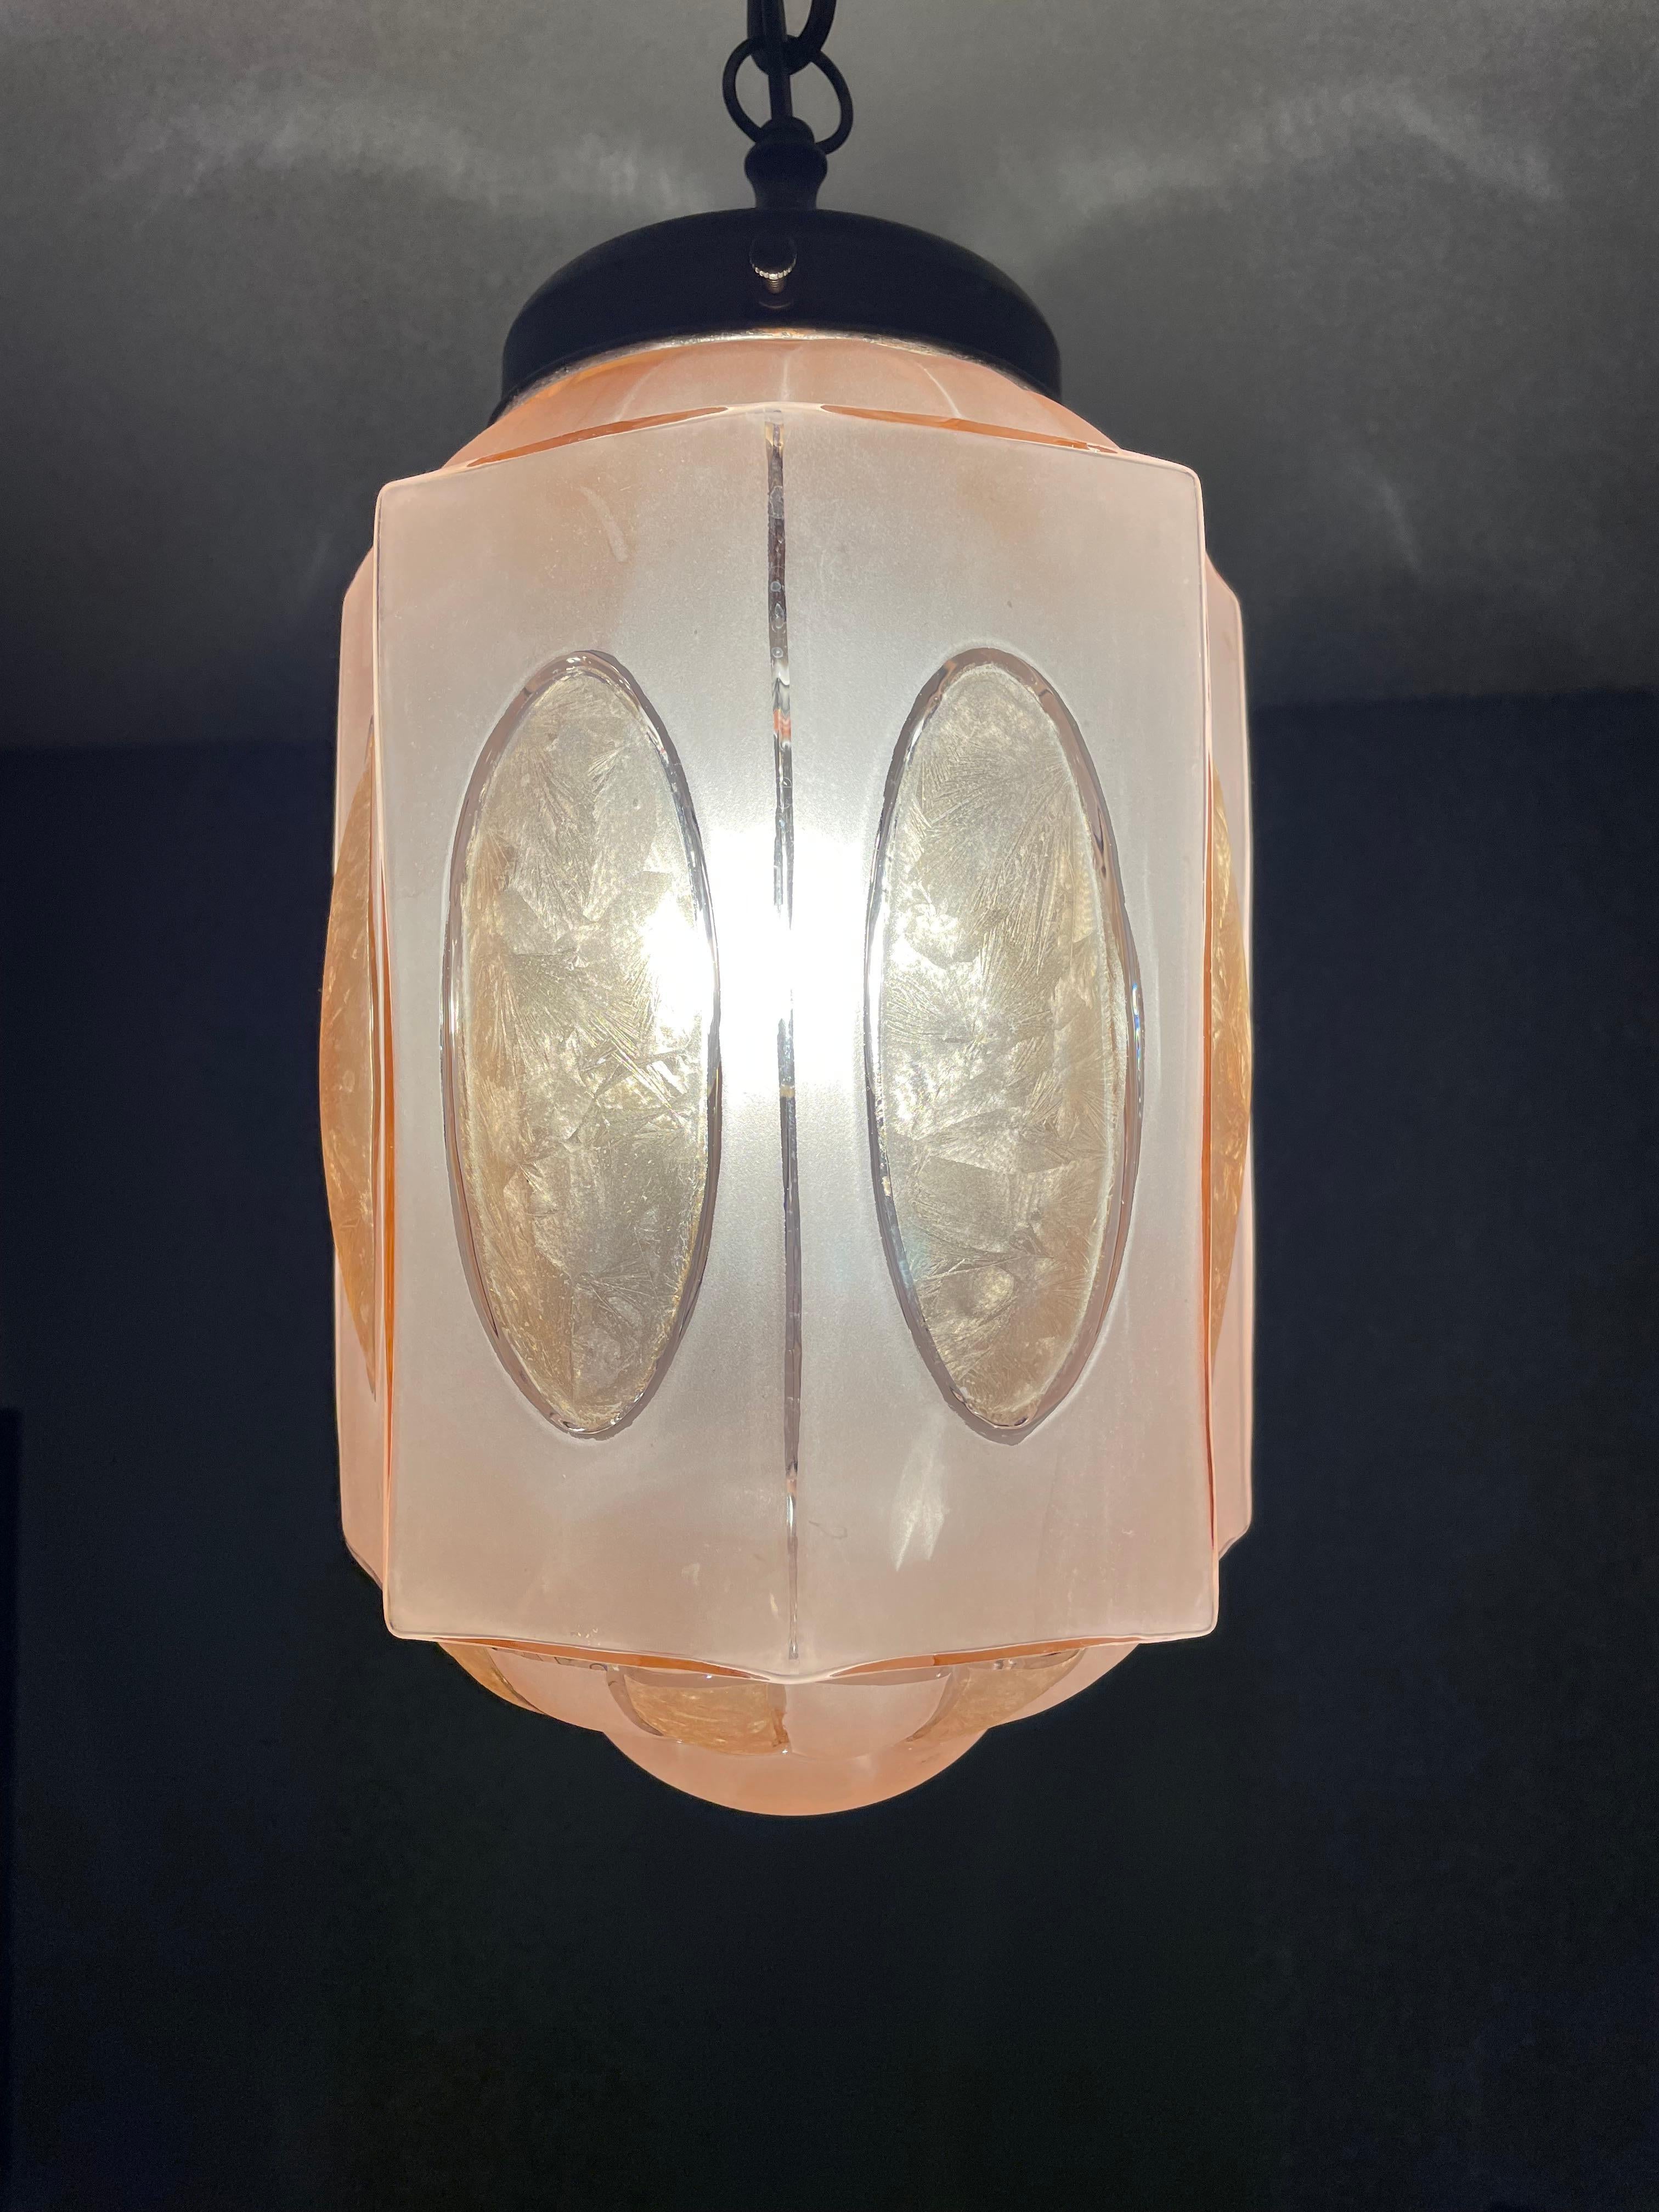 Rare Art Deco Pendant Light Fixture w. Octagonal Satinated & Frosted Glass Shade For Sale 10